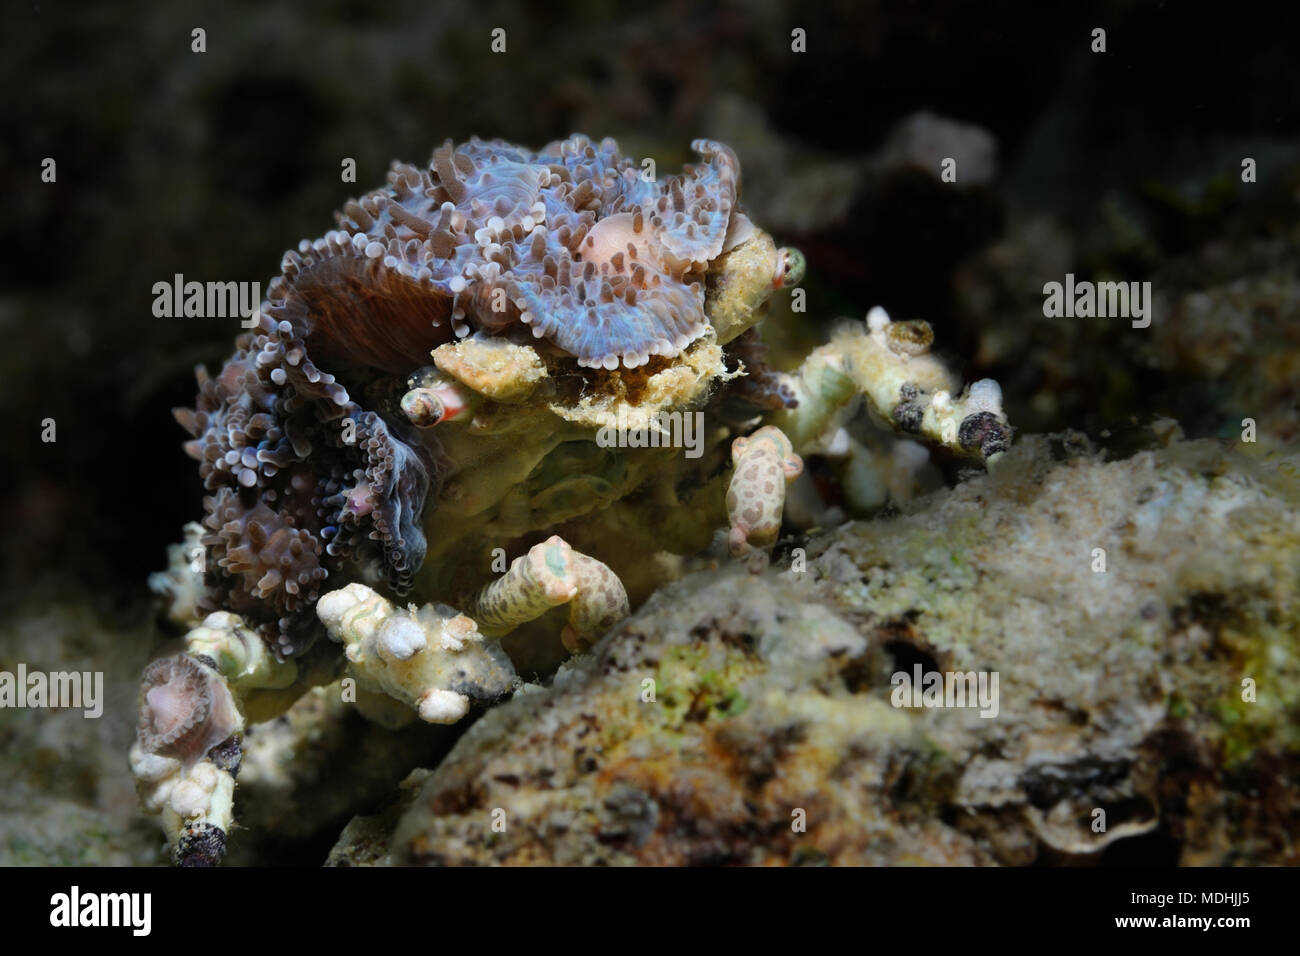 Corallimorph decorator crab is crawling over a coral reef, Panglao, Philippines Stock Photo